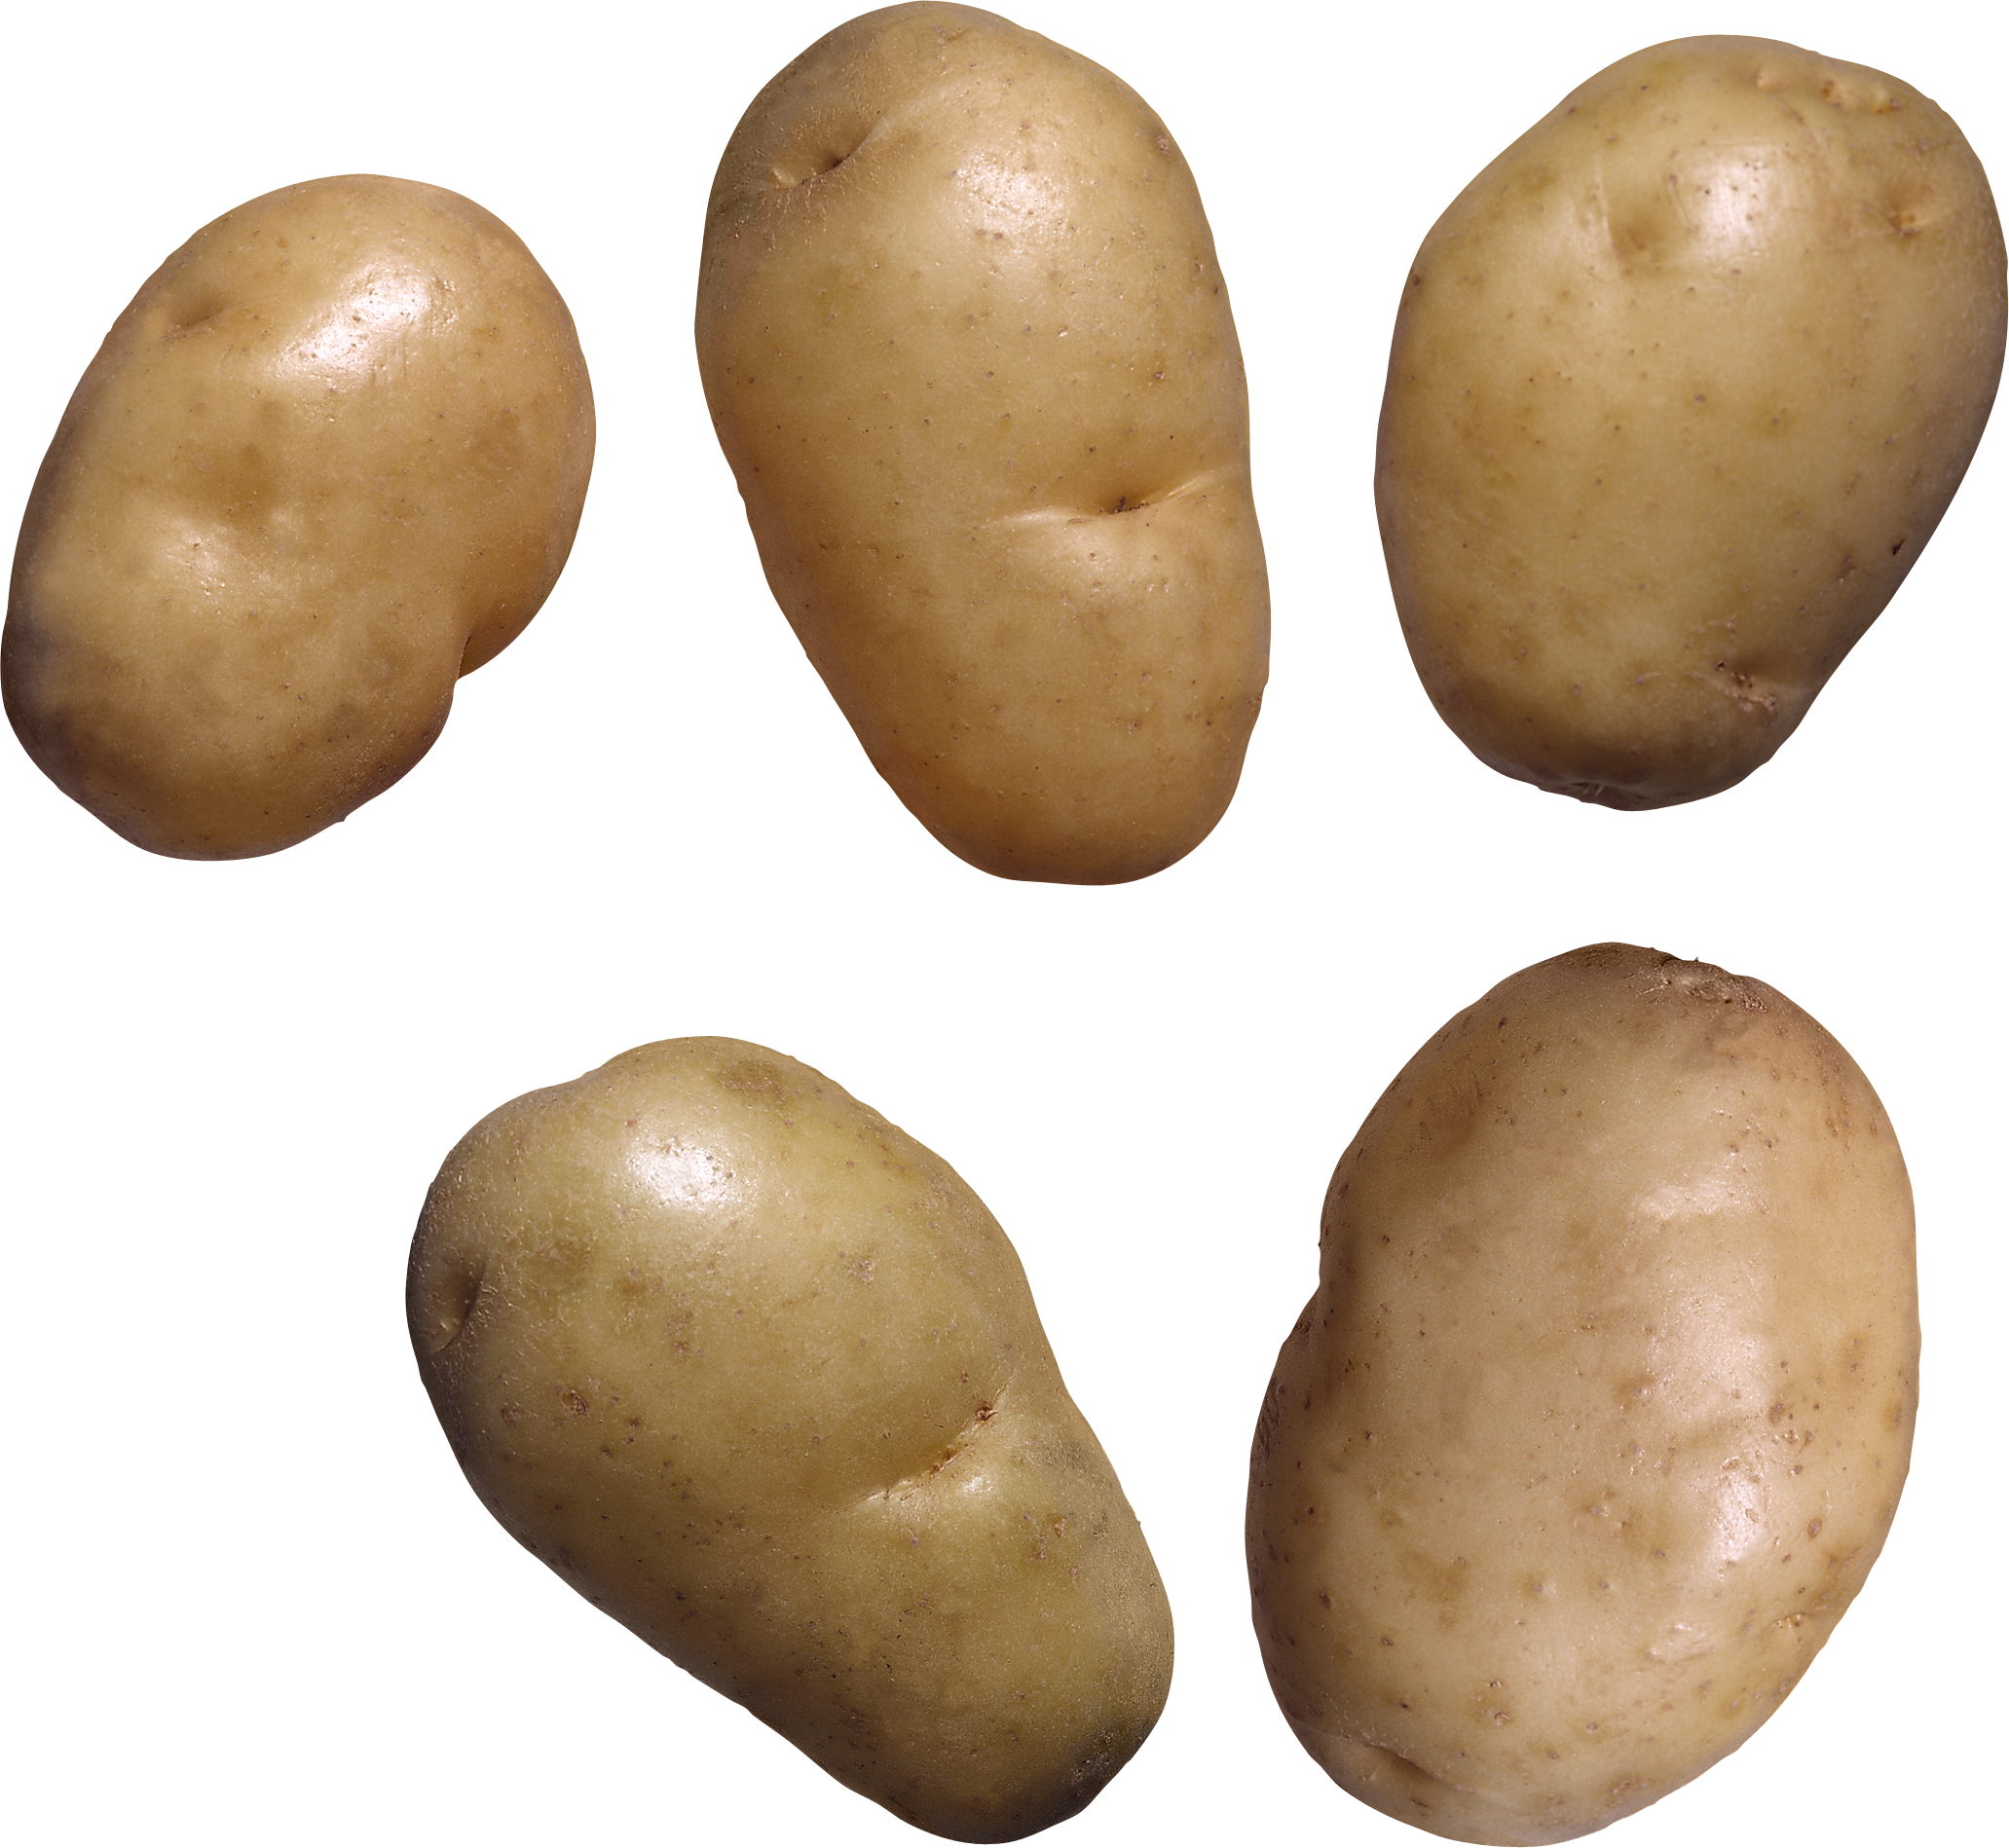 Potato Potatoe Gold Foodstuff, Ingredients, Plant, Farm PNG Transparent  Image and Clipart for Free Download